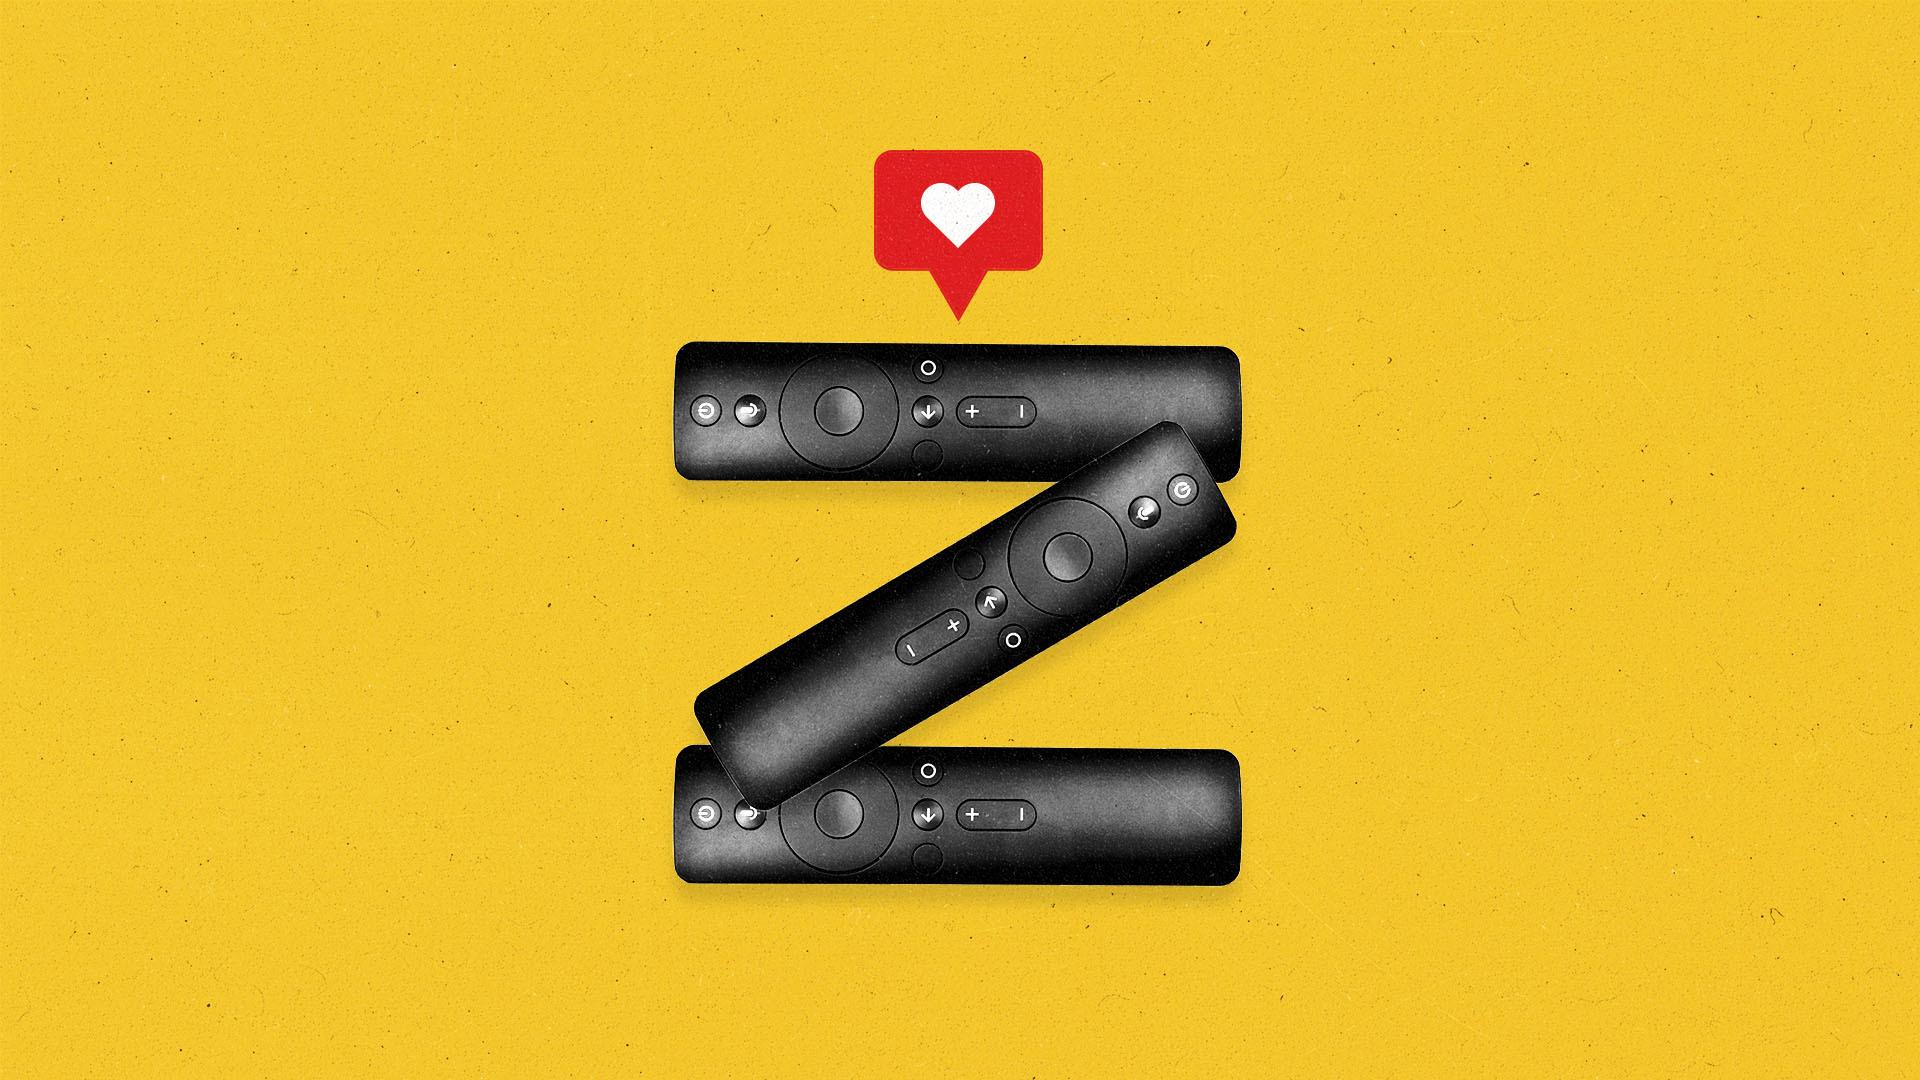 Three connected TV remotes form the shape of a Z, with a "like" emoji coming from above.